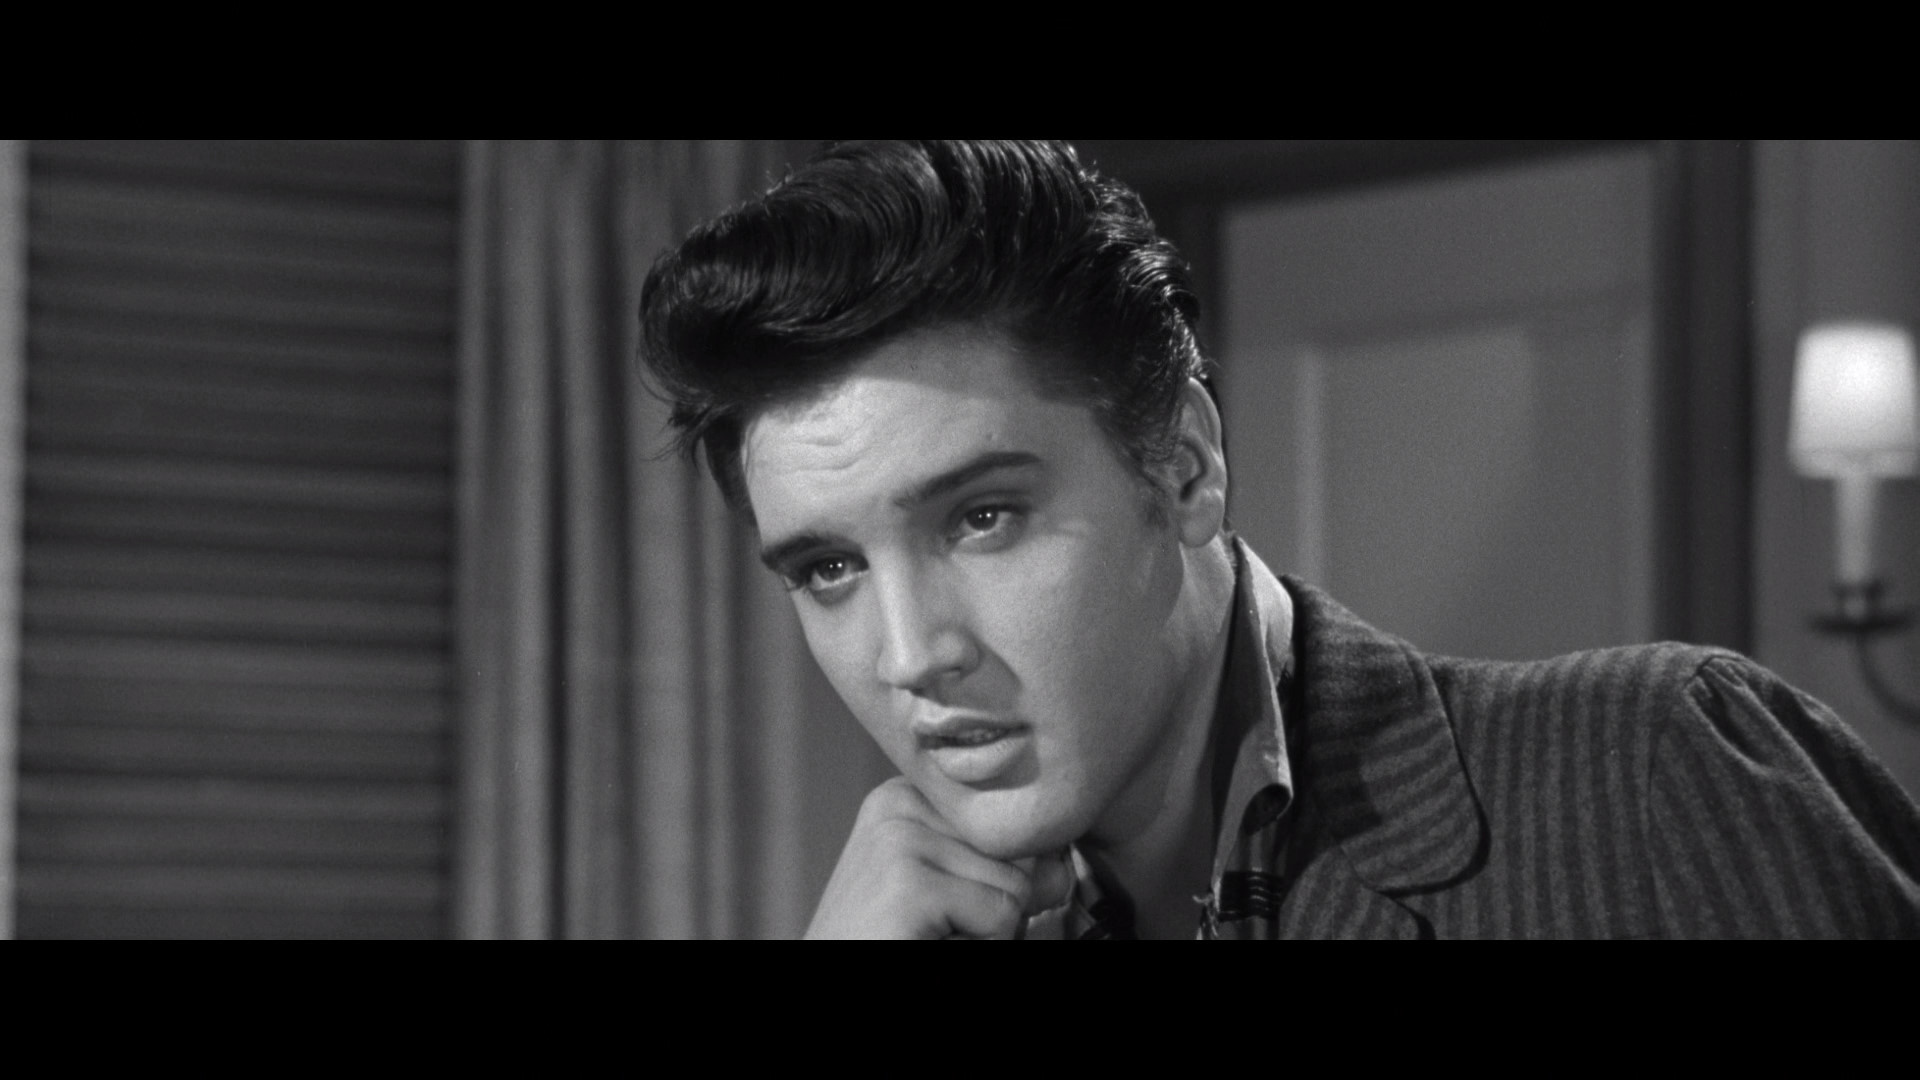 Jailhouse Rock – Publicity still of Elvis Presley. The image measures 3200 2174 pixels and was added on 7 August